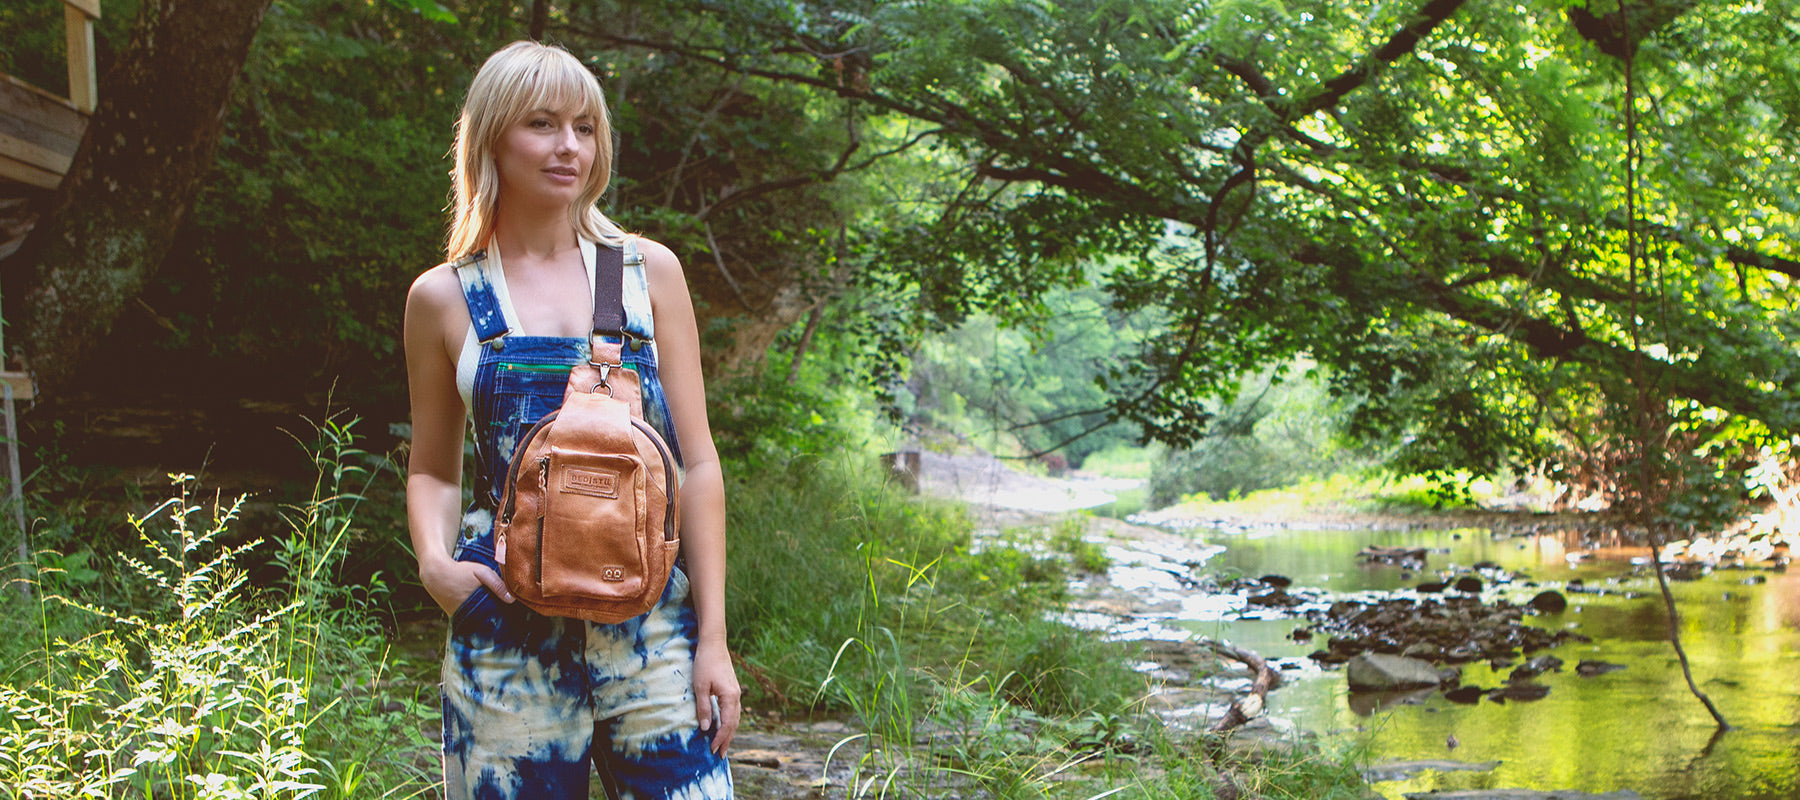 Blonde woman standing by a creek while wearing blue and white tie dye overalls and tan leather backpack.